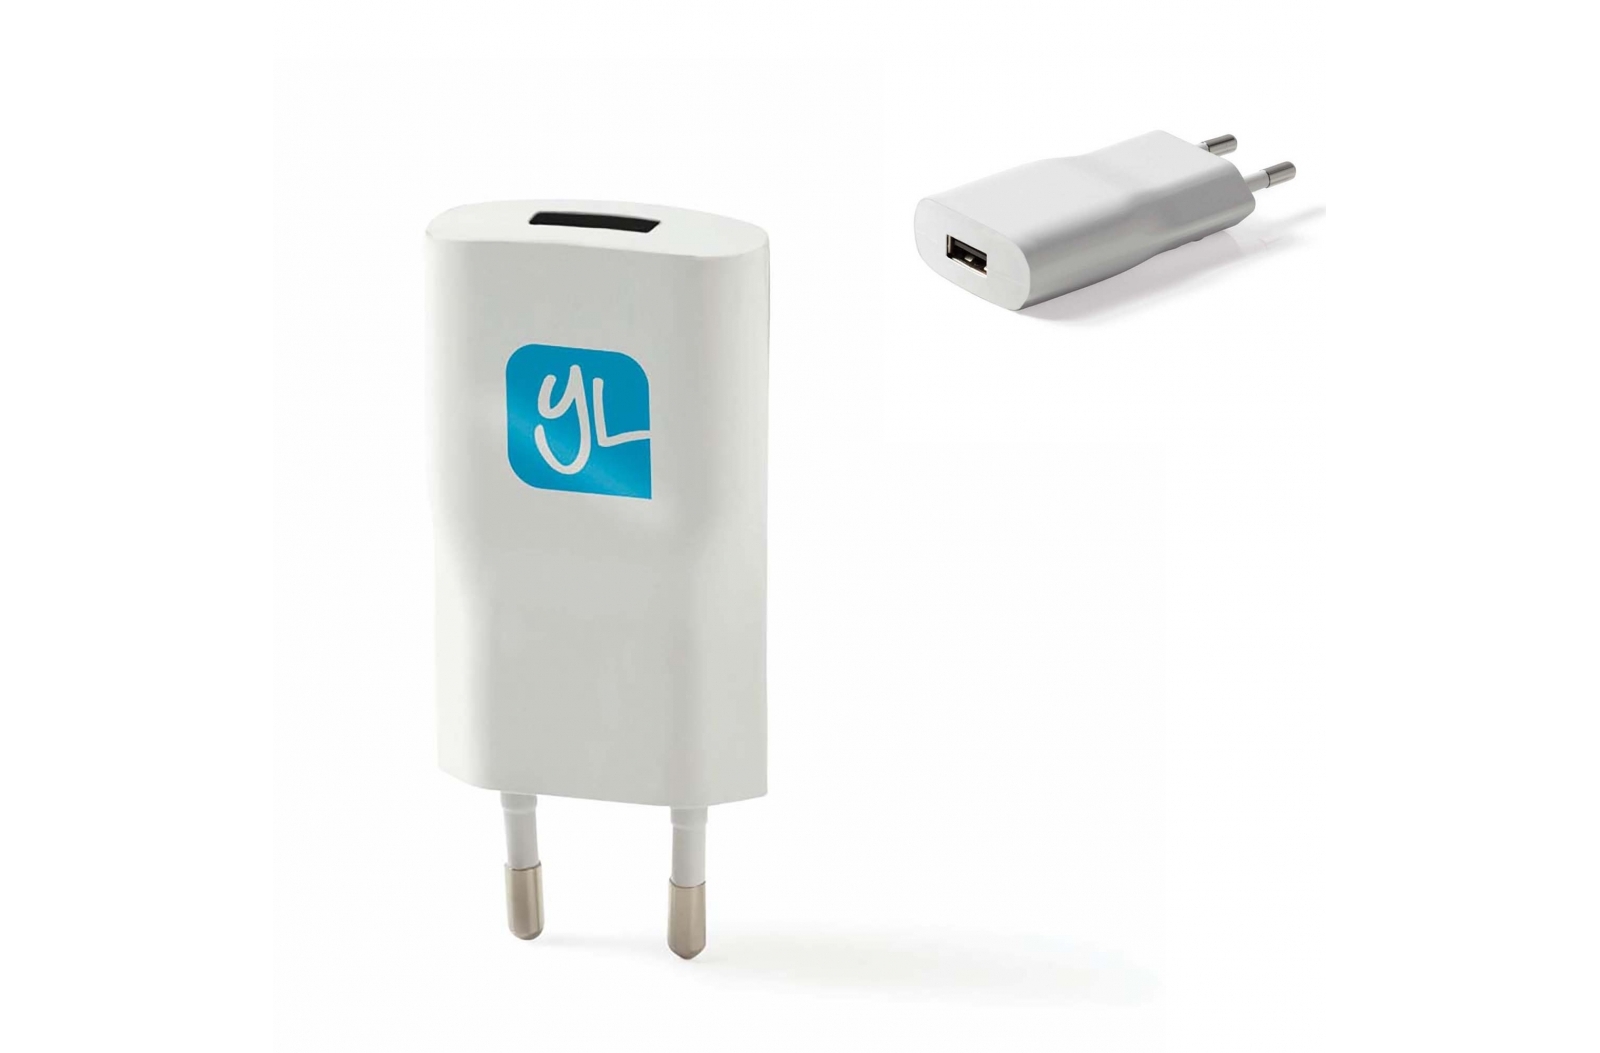 USB Power Charger - Little Baddow - Bicester